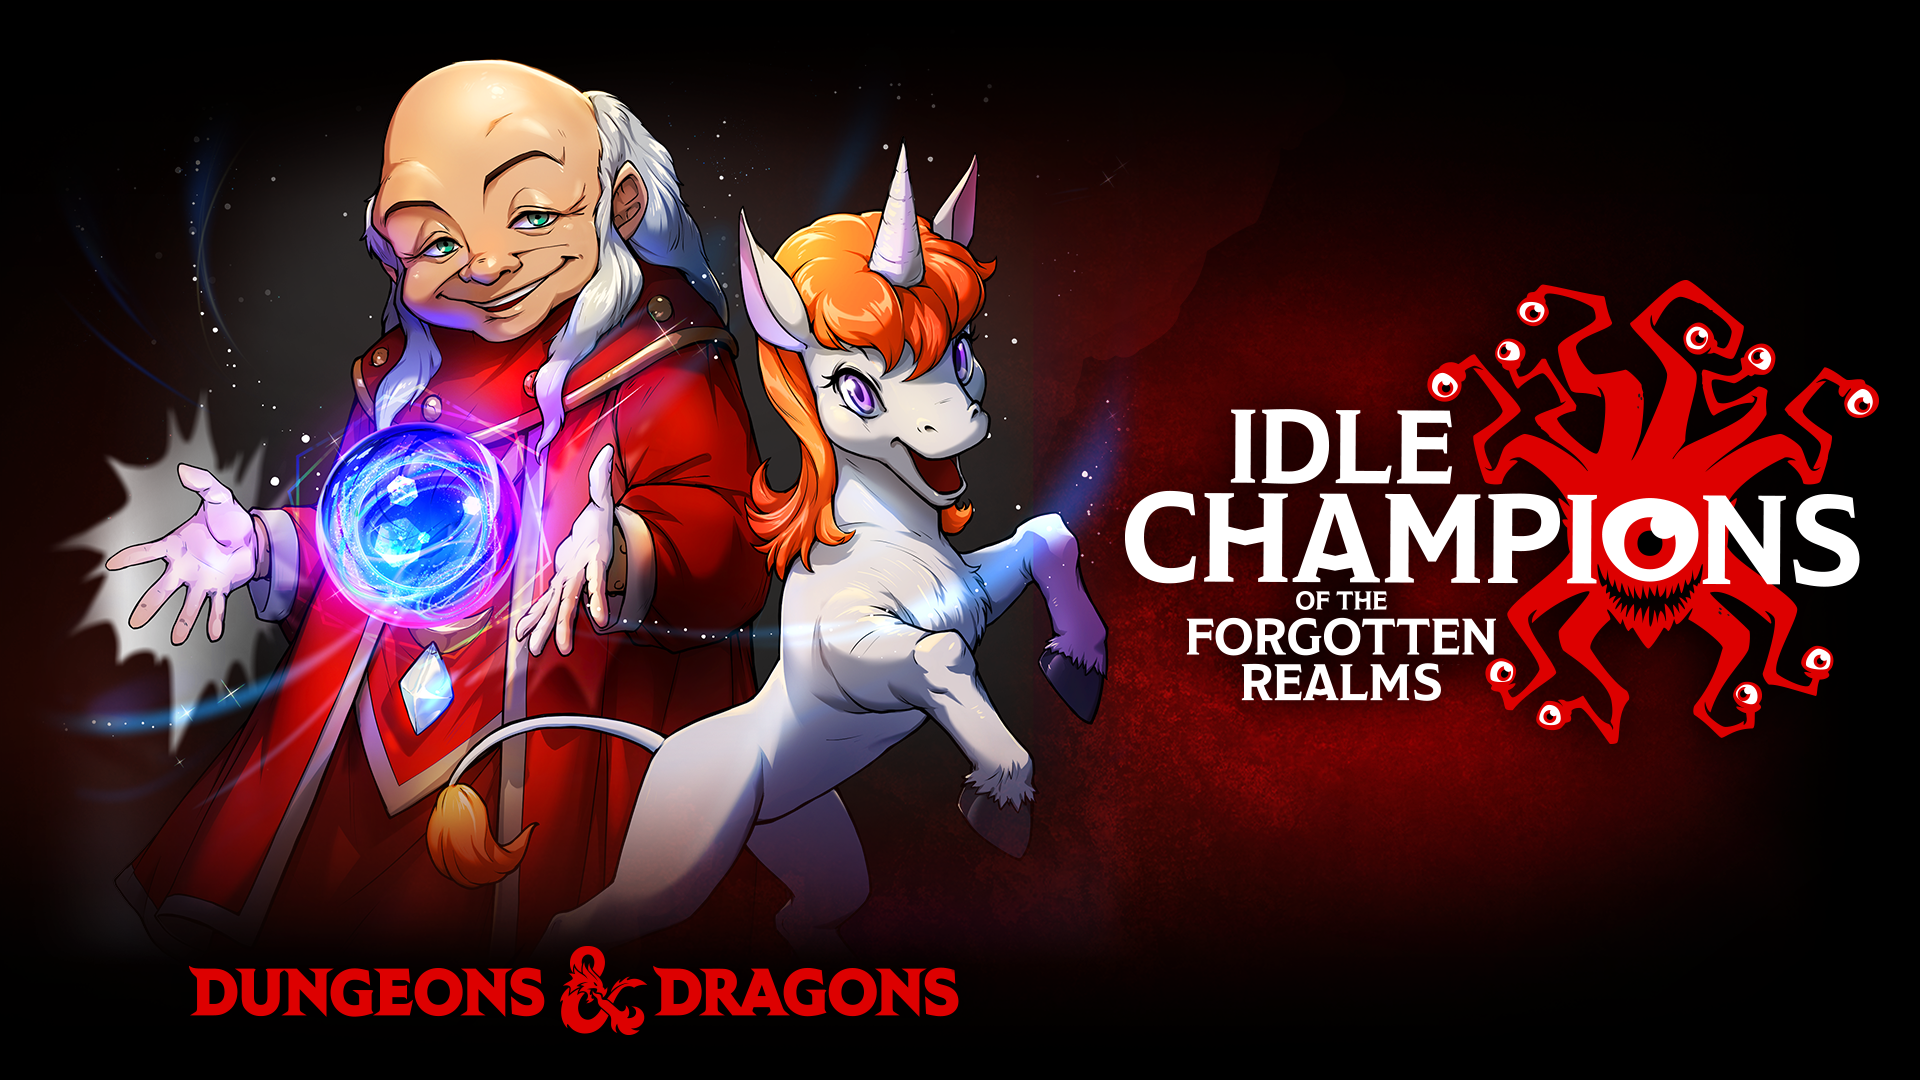 Idle Champions to Introduce Dungeon Master and Uni From 1980s Dungeons &  Dragons Cartoon